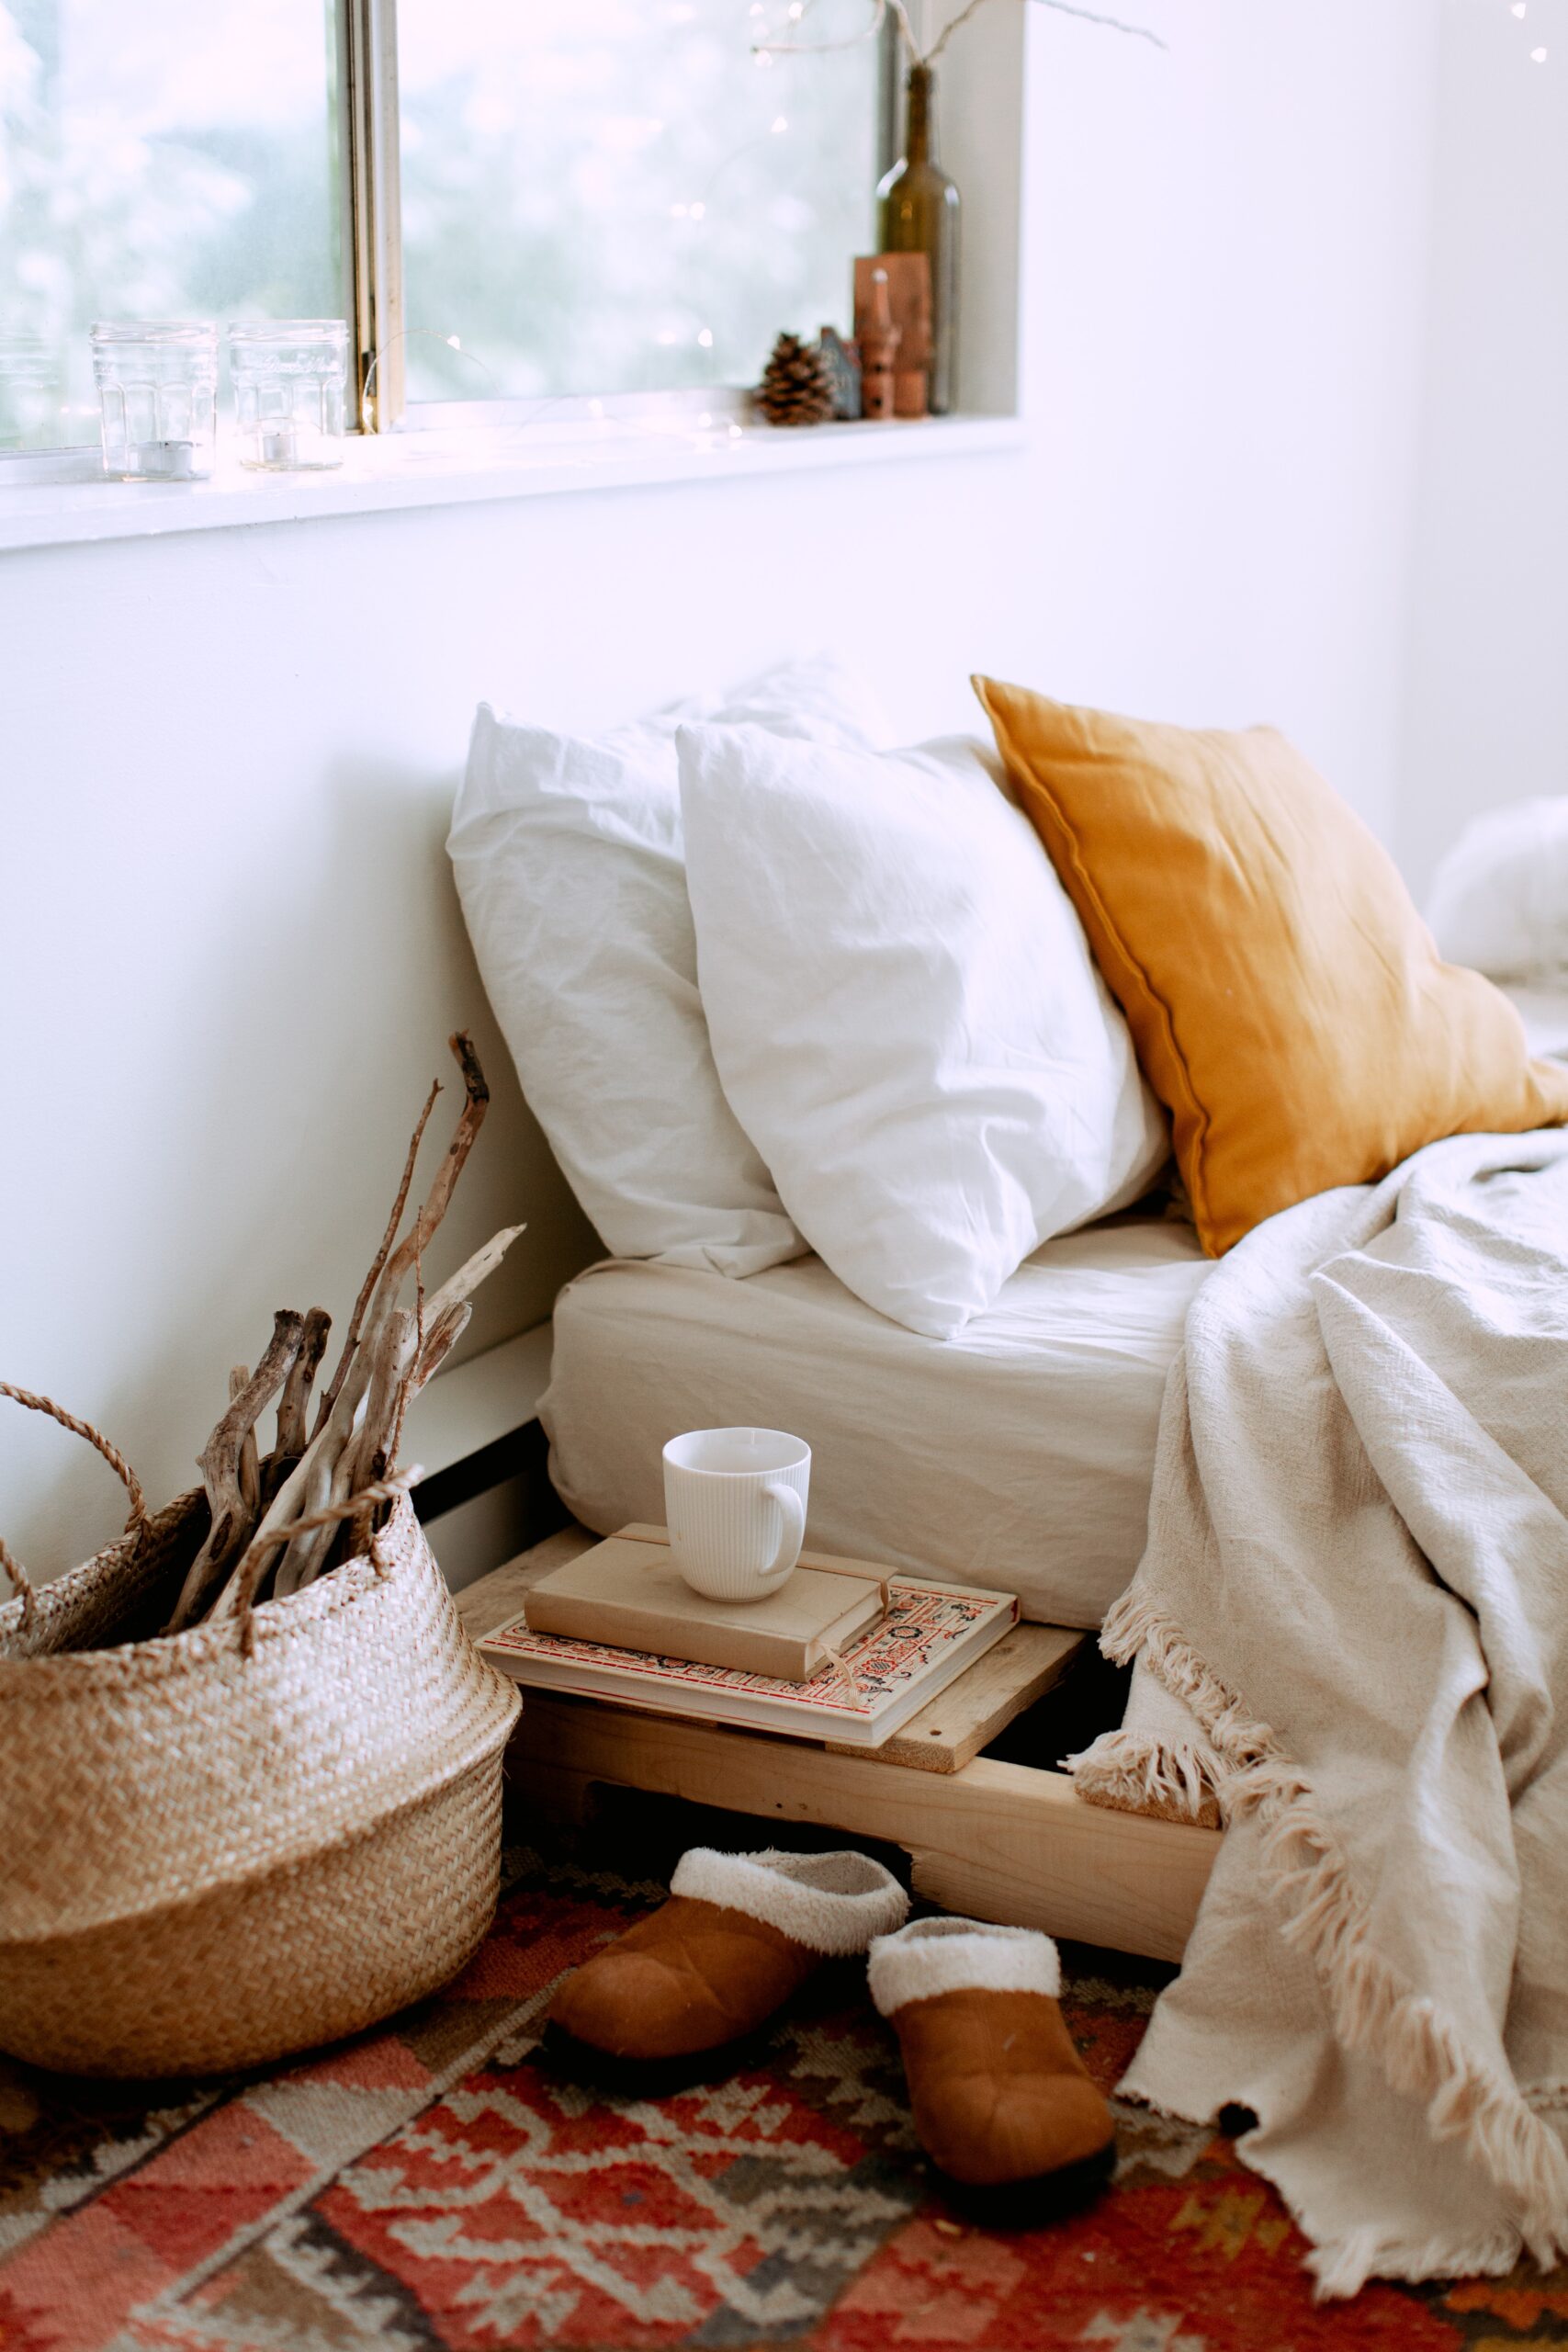 the head end of a bed with 3 pillows and a blanket pulled back, with a seagrass basket, a mug and a pair of slippers on the floor; How To Keep Your Home Warm Without Spending Lots Of Money